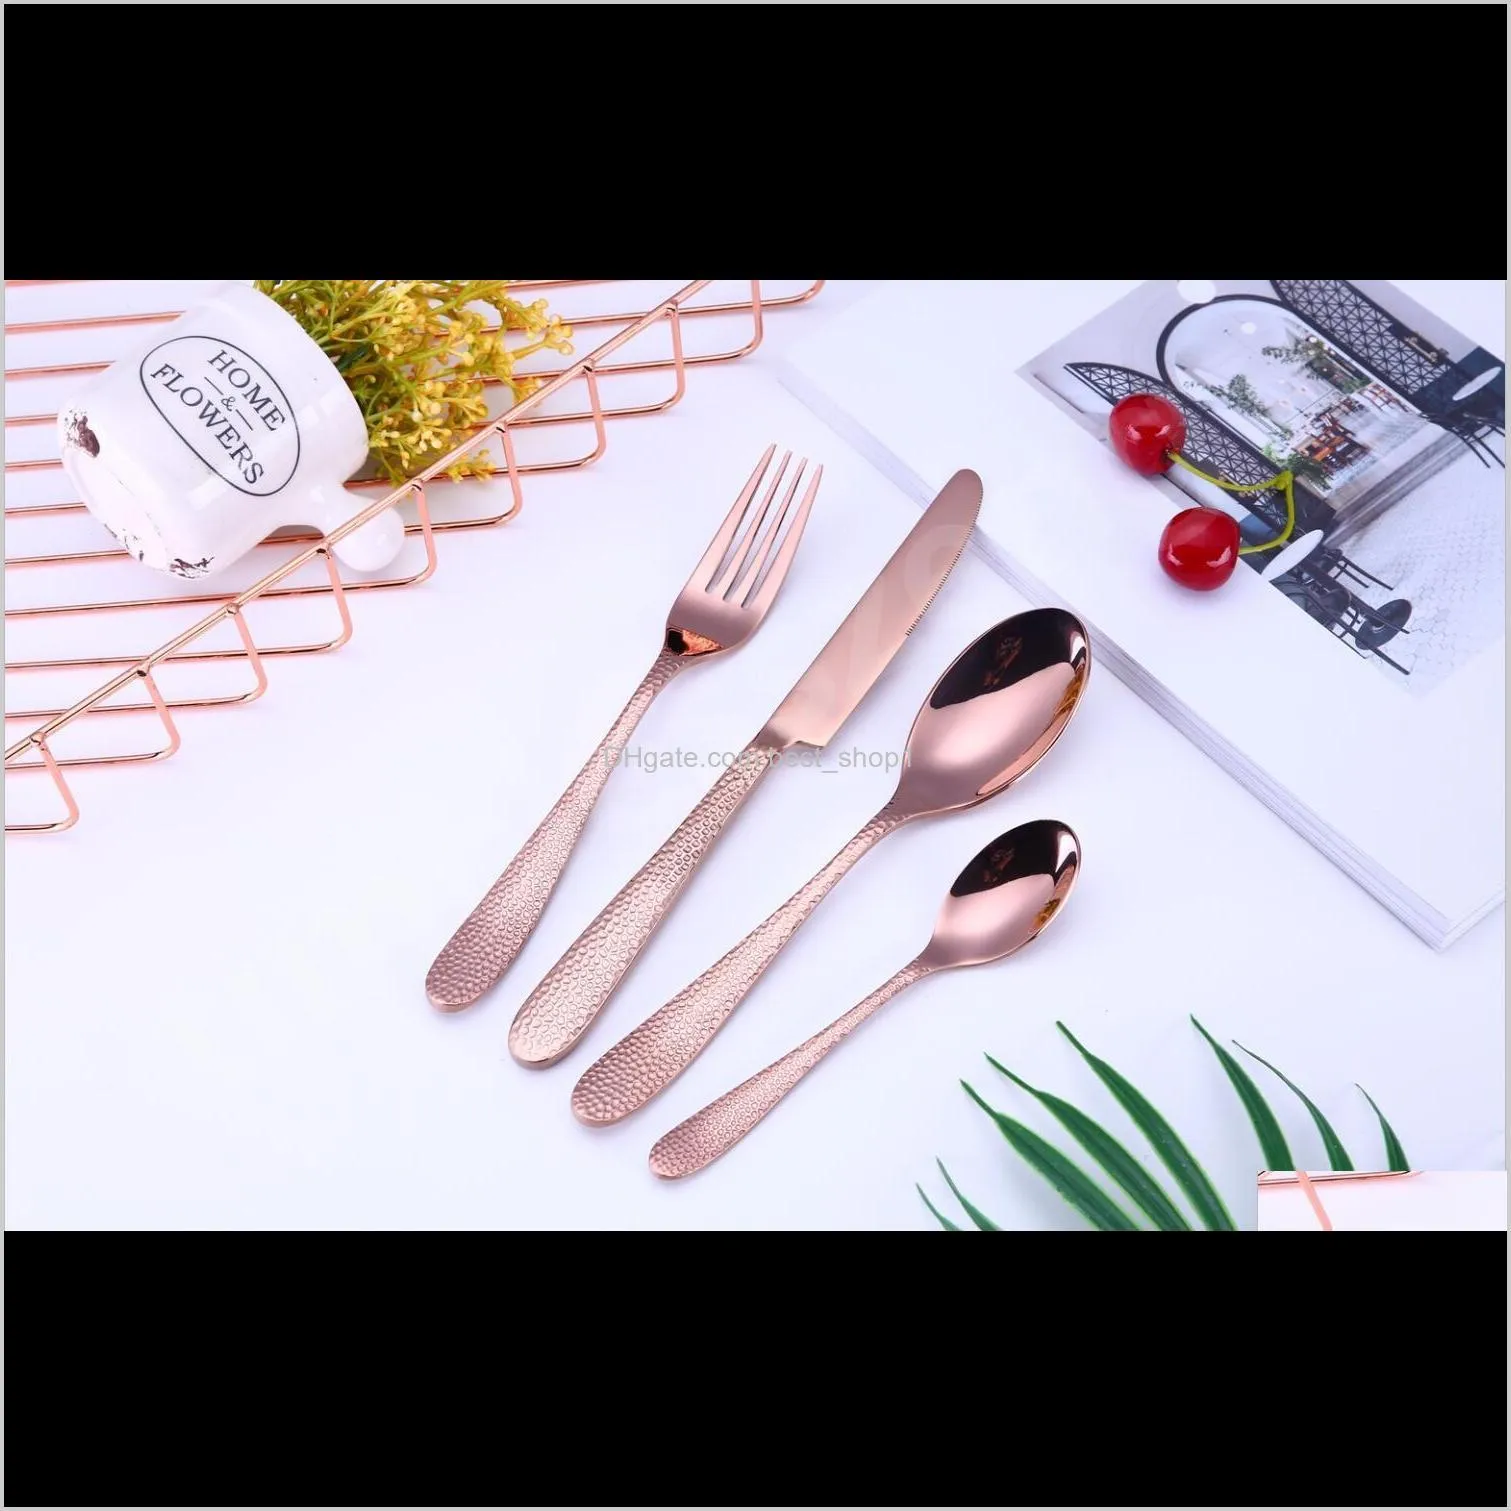 5 colors high-grade gold cutlery flatware set spoon fork knife teaspoon stainless dinnerware sets kitchen tableware set 10 choices